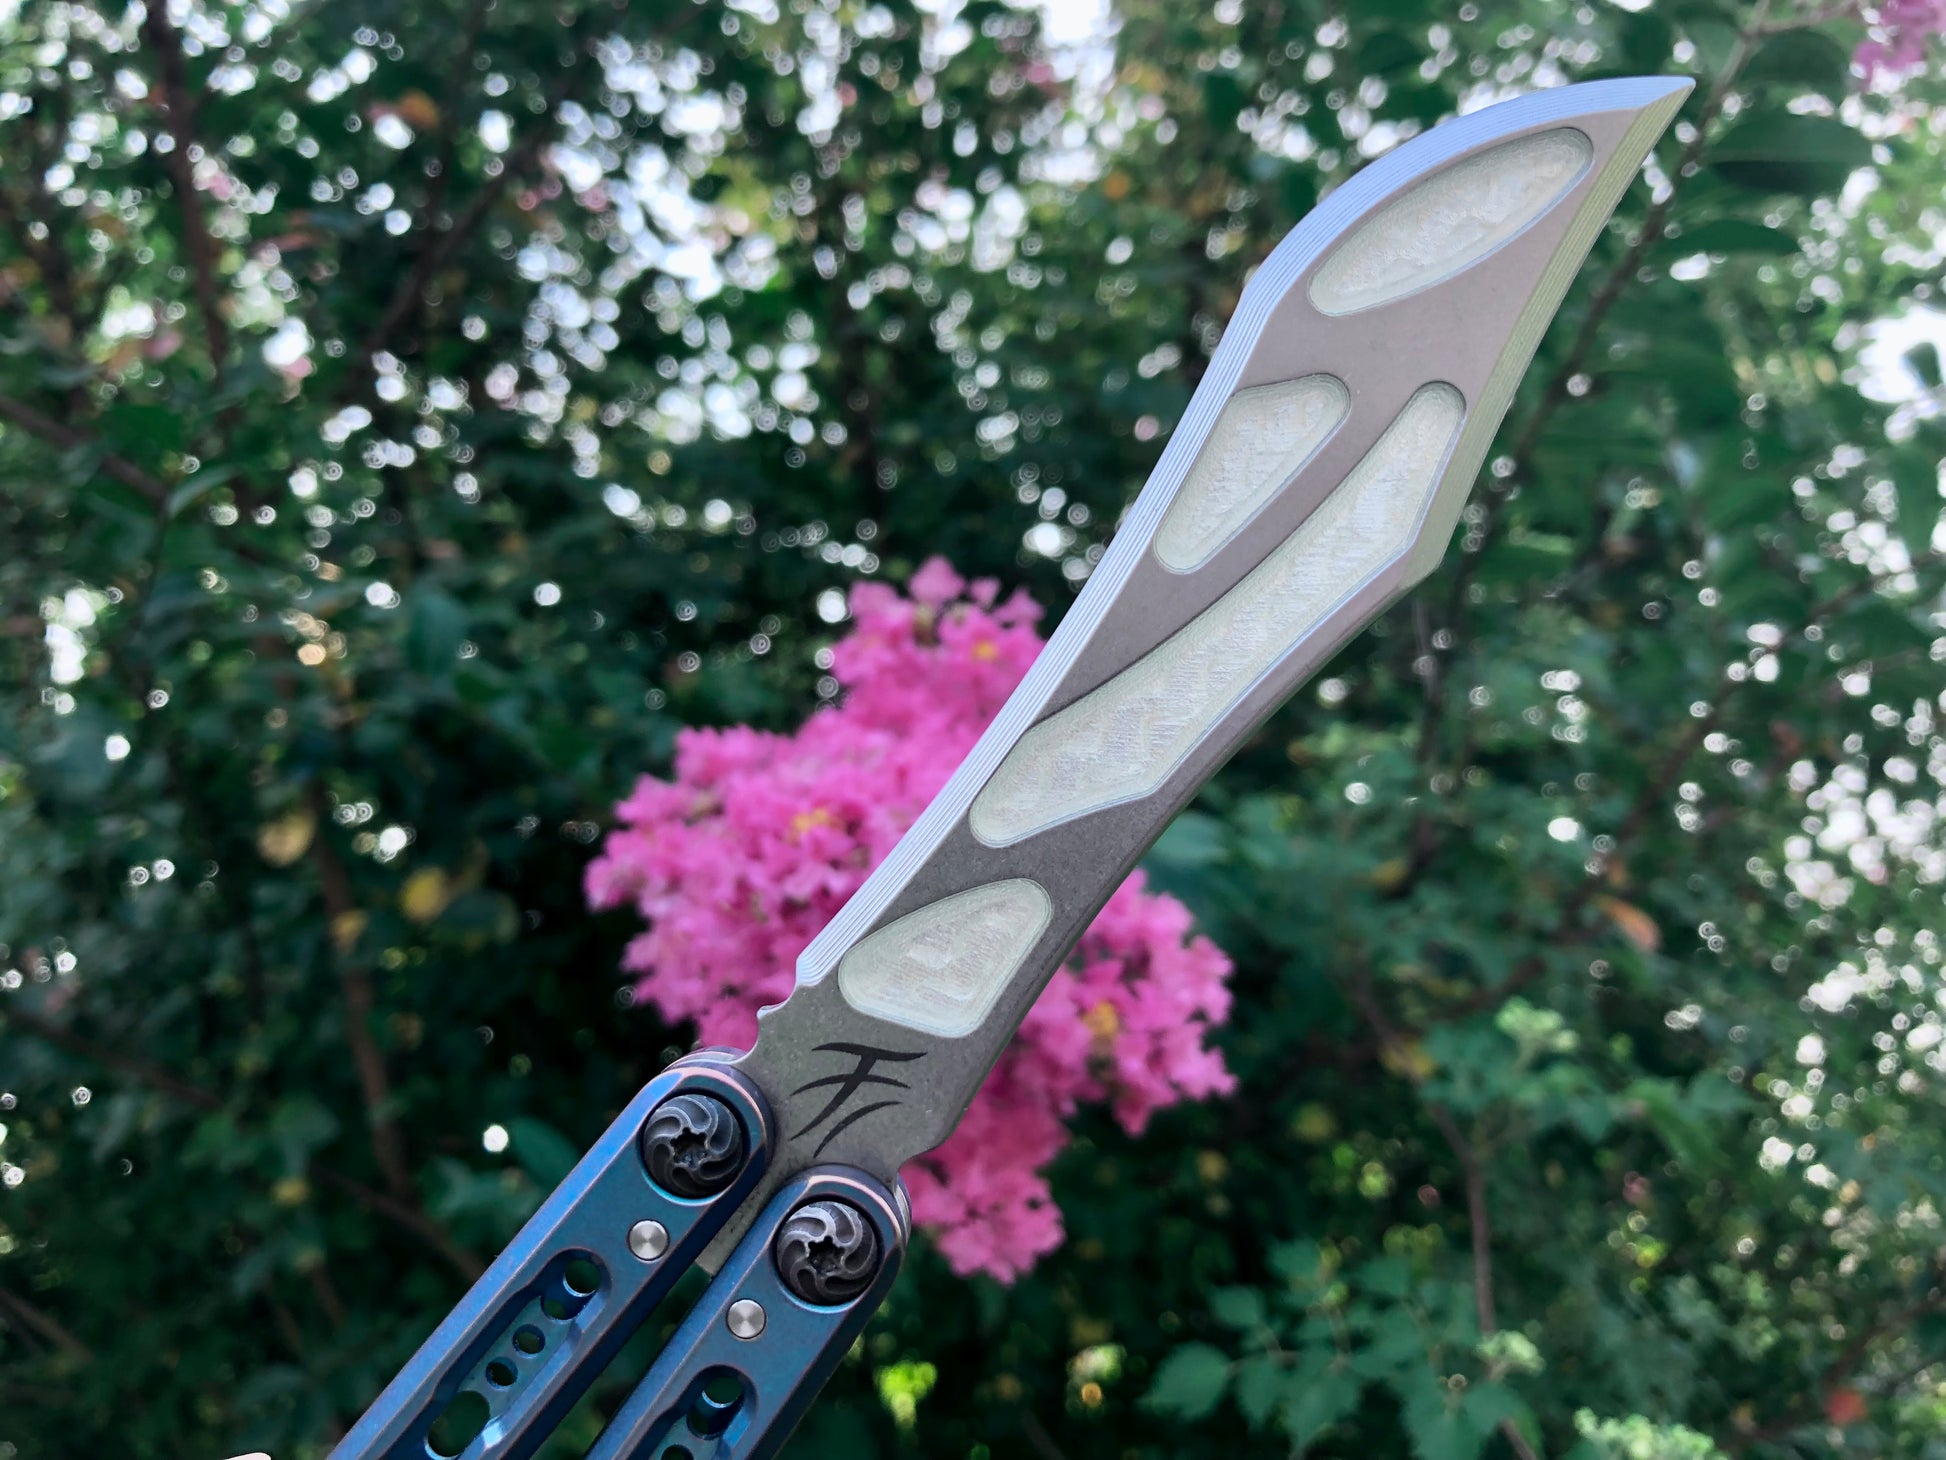 Integrate additional jimping surface area and an adjustable weight system into the Fellowship Blades Medusa v3 and Empusa v3 balisongs with this polyurethane Zippy mod. Adjust the balance and add color to the trainer blade with these polyurethane Zippy inserts.